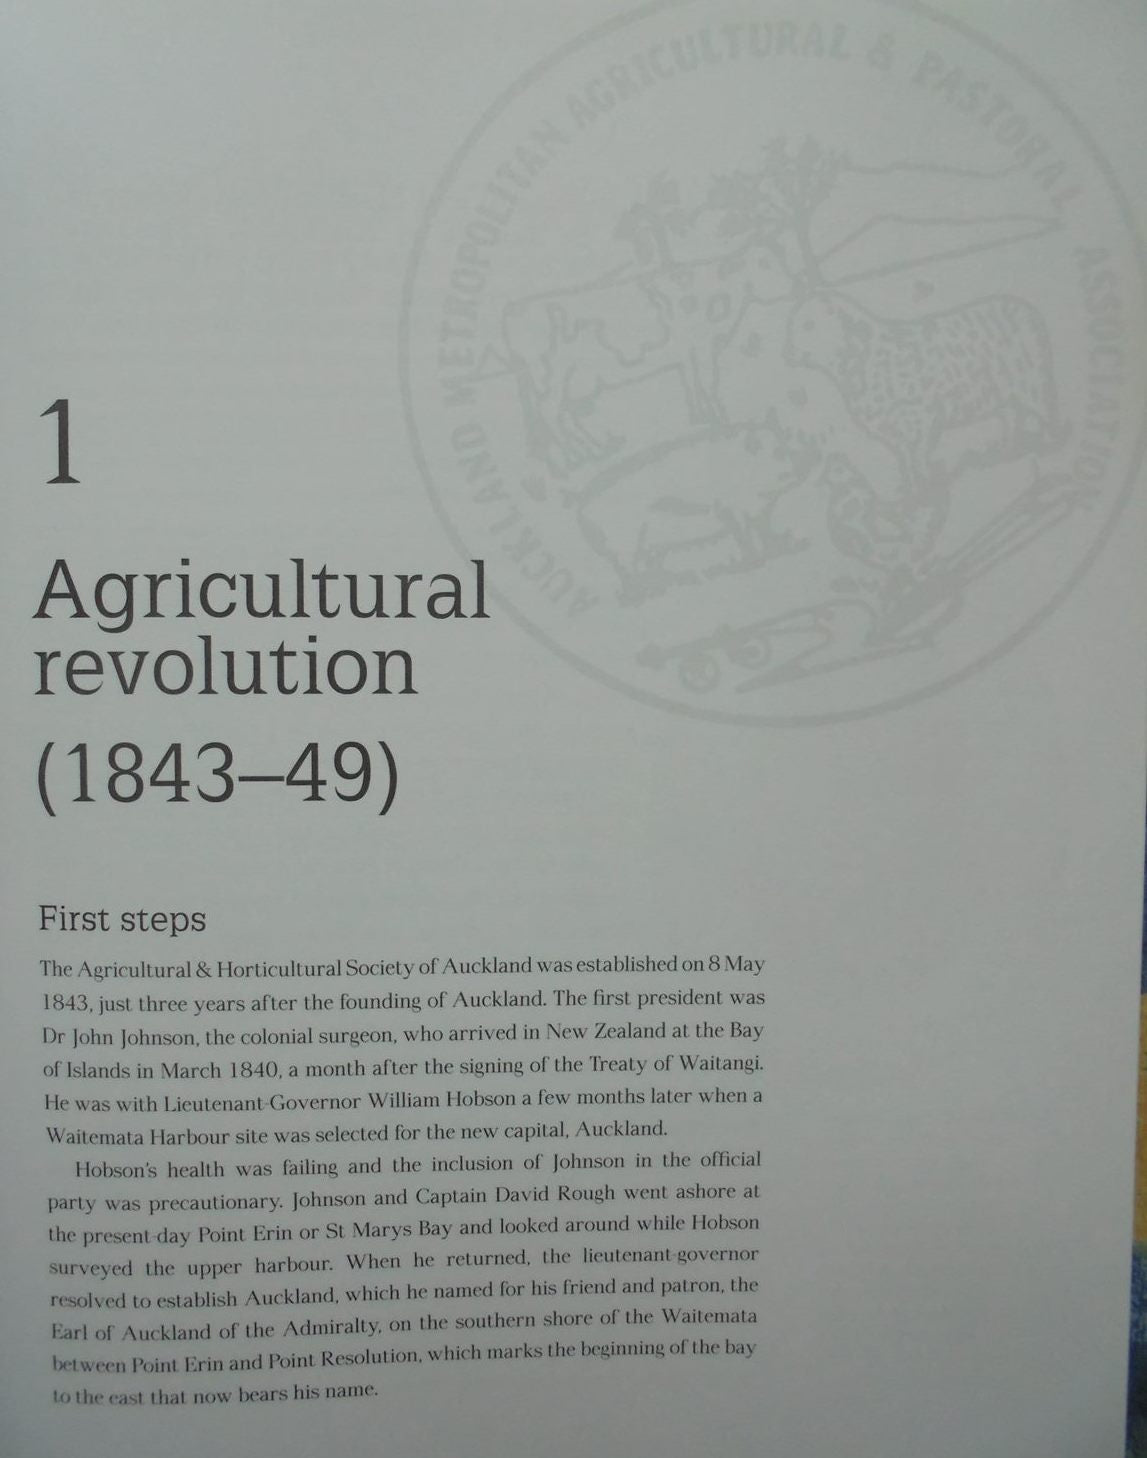 "Agricultural Heritage : Auckland Agricultural & Pastoral Association Inc. 1843-2010 " by Hugh Stringleman SIGNED BY AUTHOR.